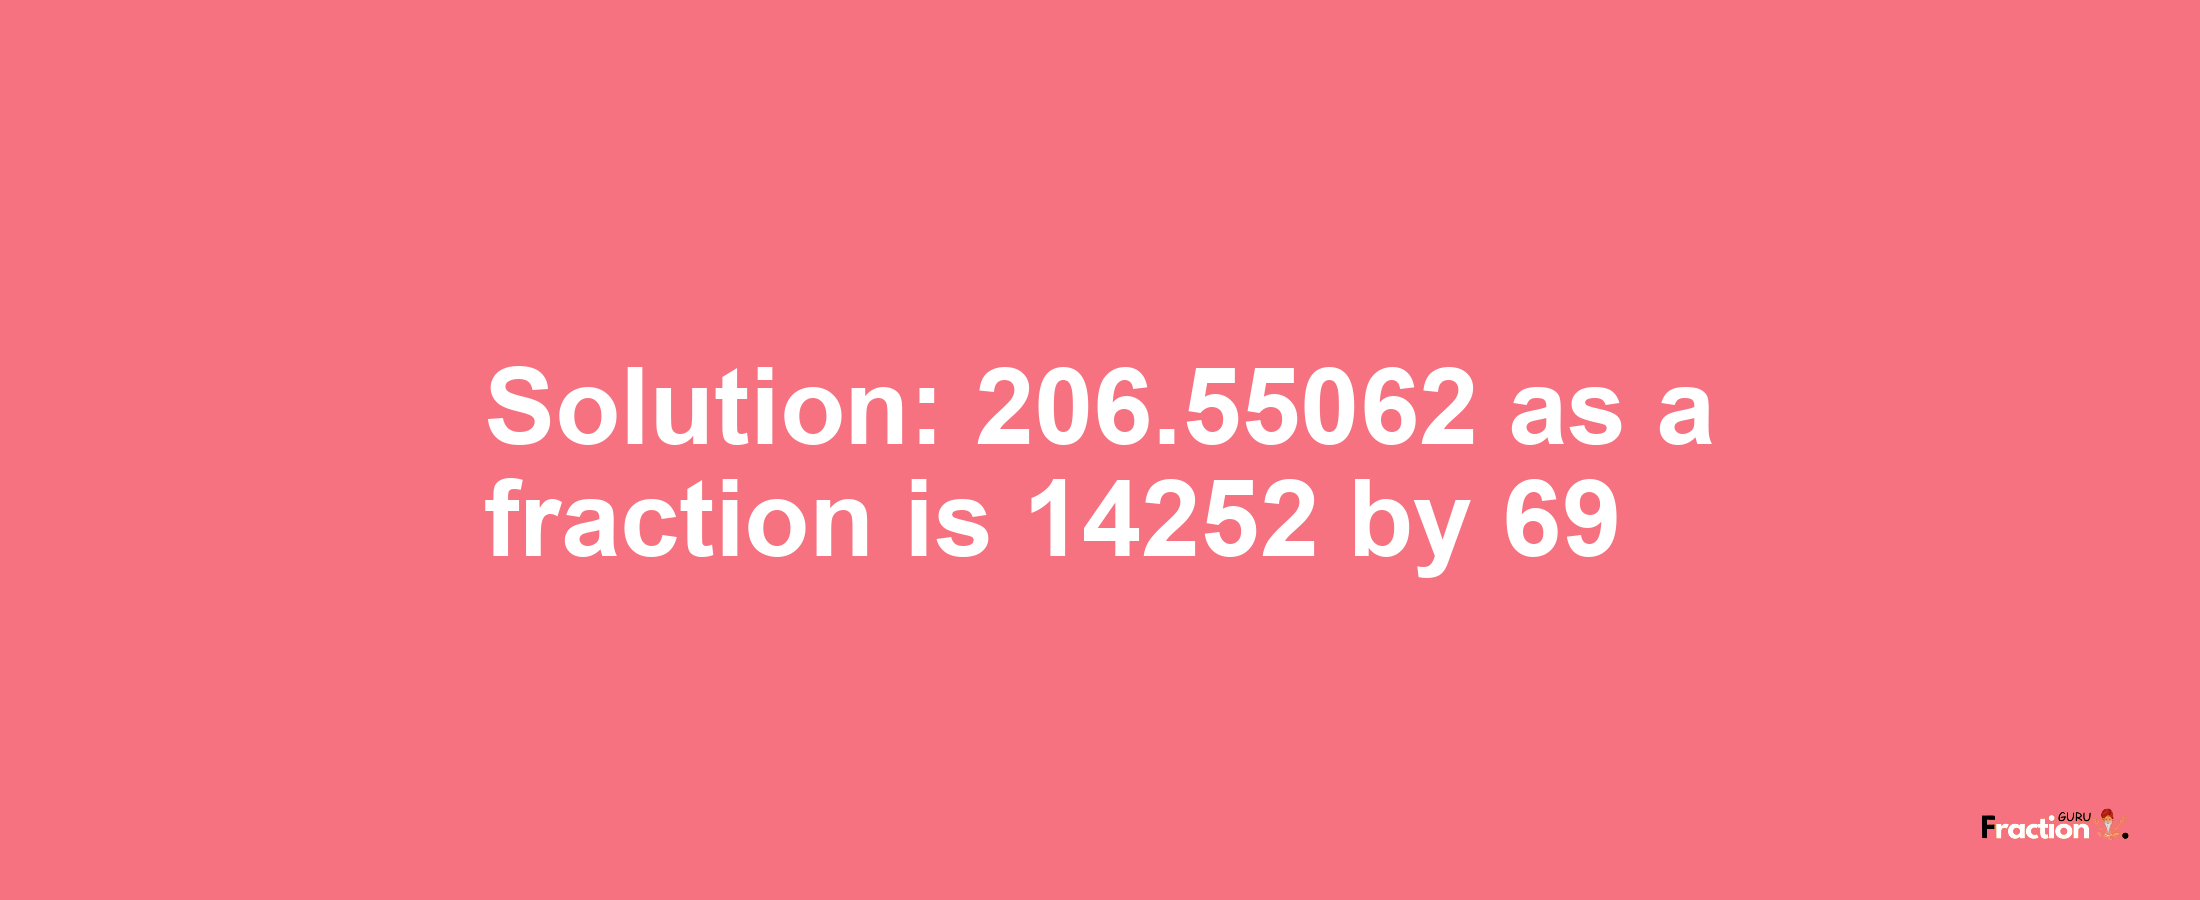 Solution:206.55062 as a fraction is 14252/69